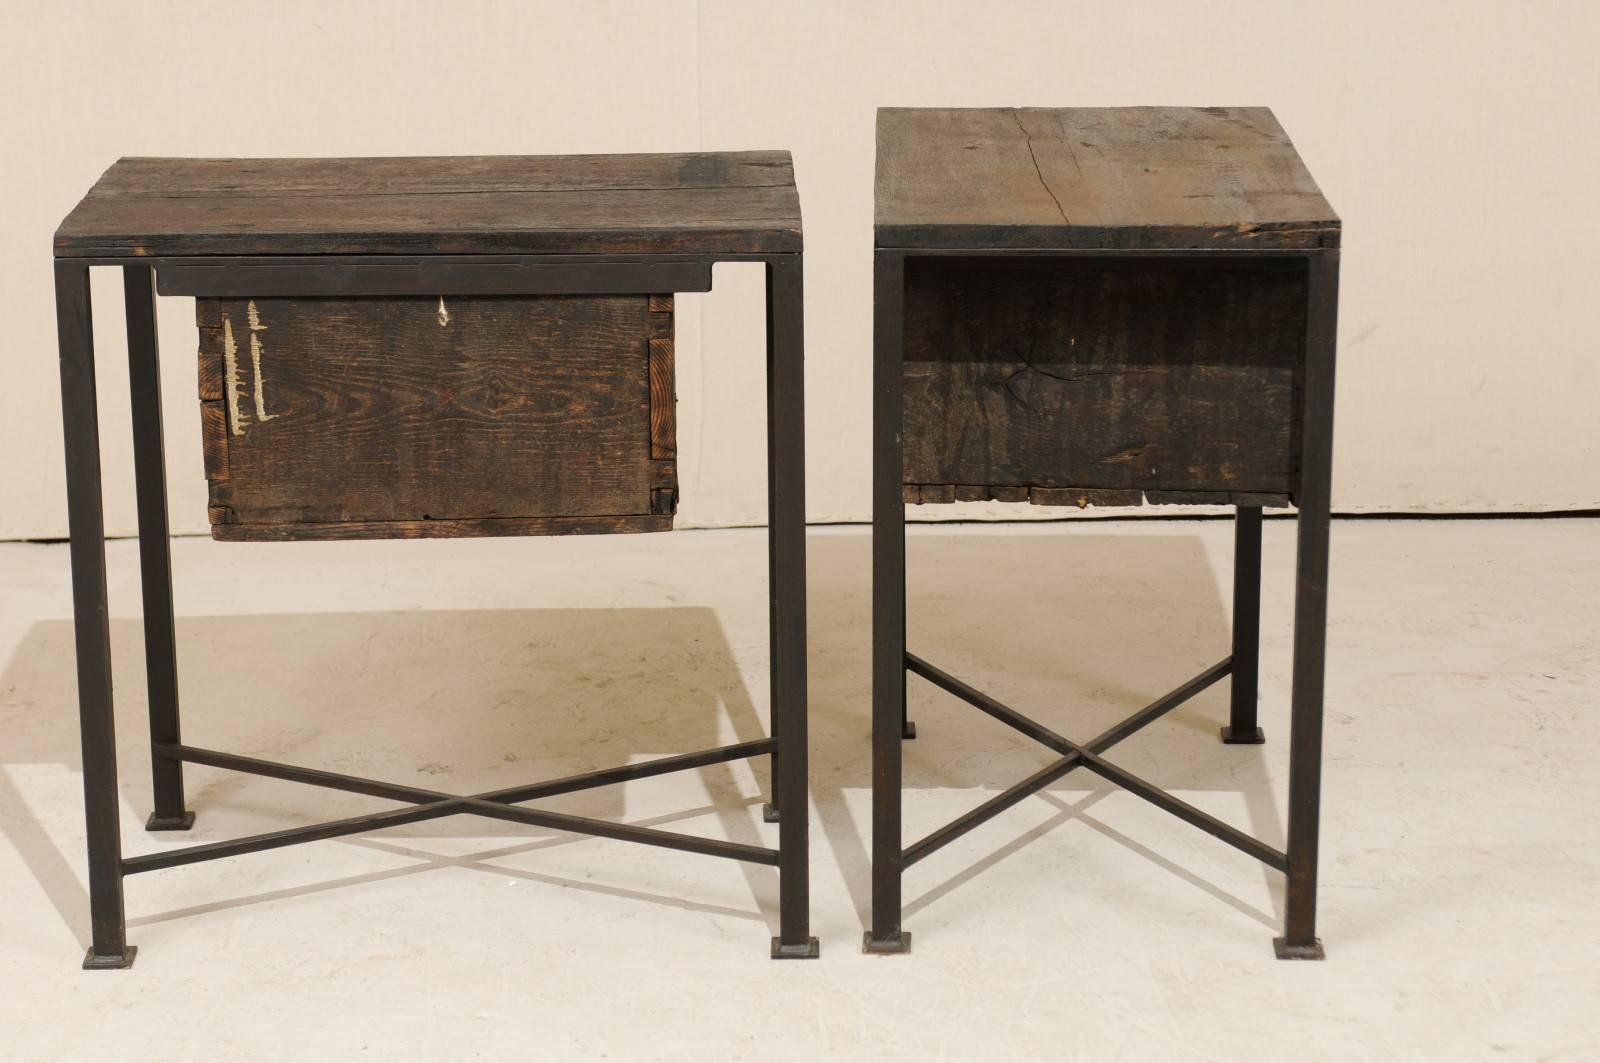 Pair of 18th Century Spanish Wood Chests on Iron Bases with Geometric Carvings 1